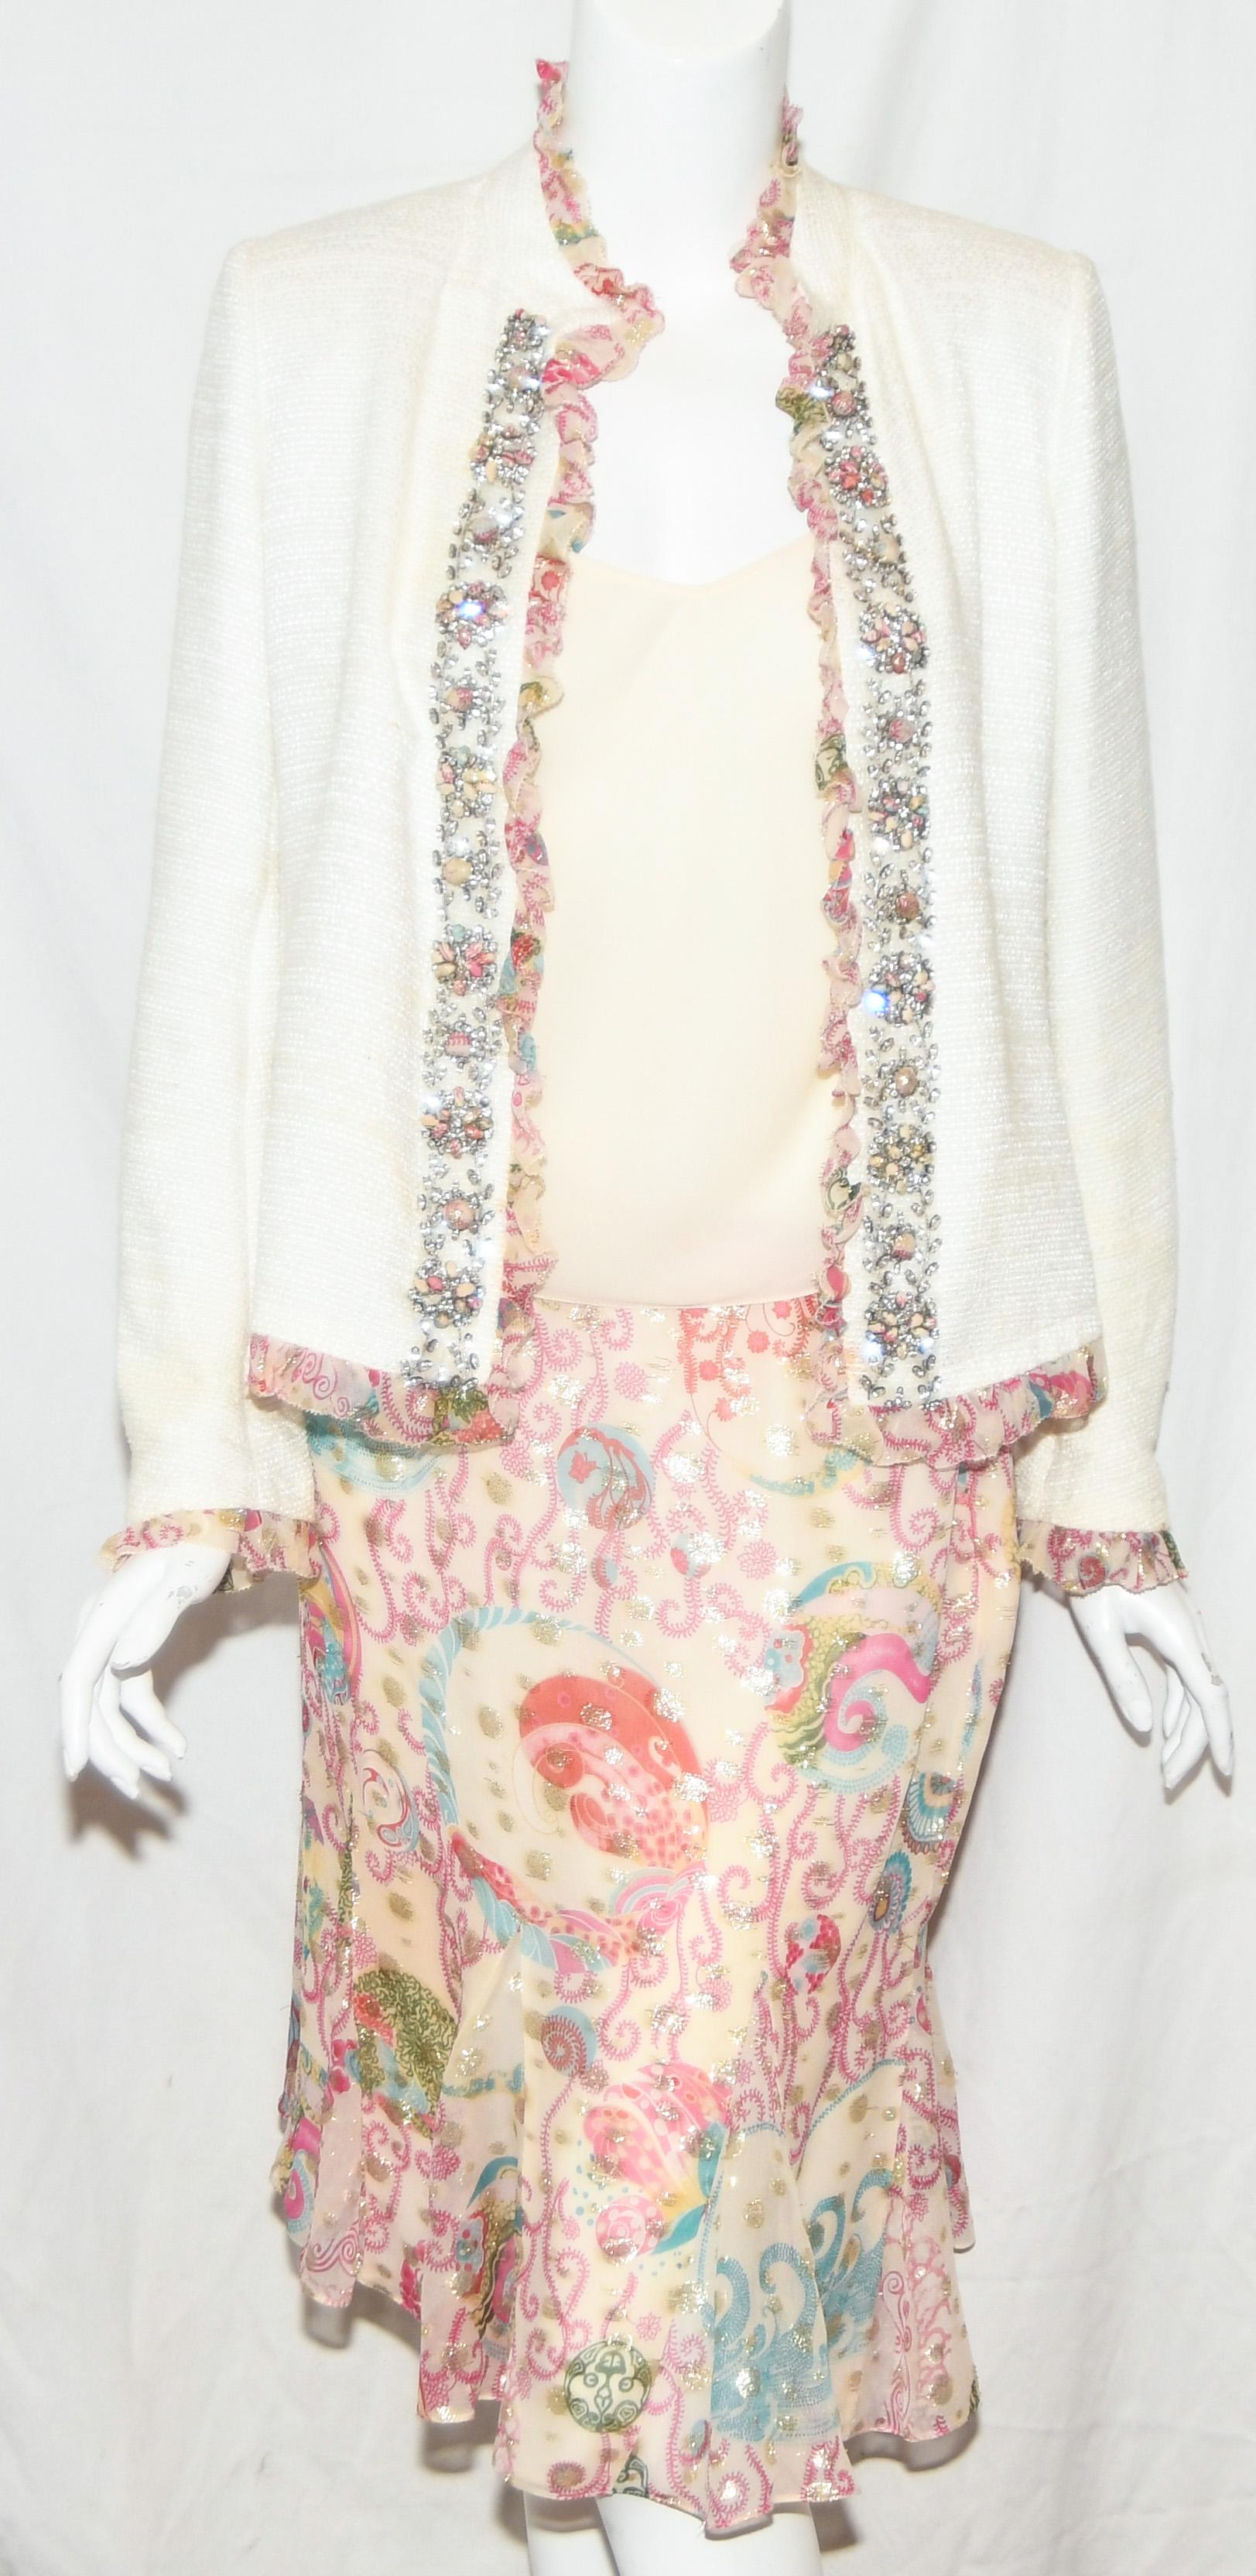 Emanuel Ungaro Ivory Jacket decorated with metallic floral ruffles around the neckline cascading down the front on both sides of opening, around the hem and cuffs.  This jacket also contains a crystal placket on each side emphasizing the delicate